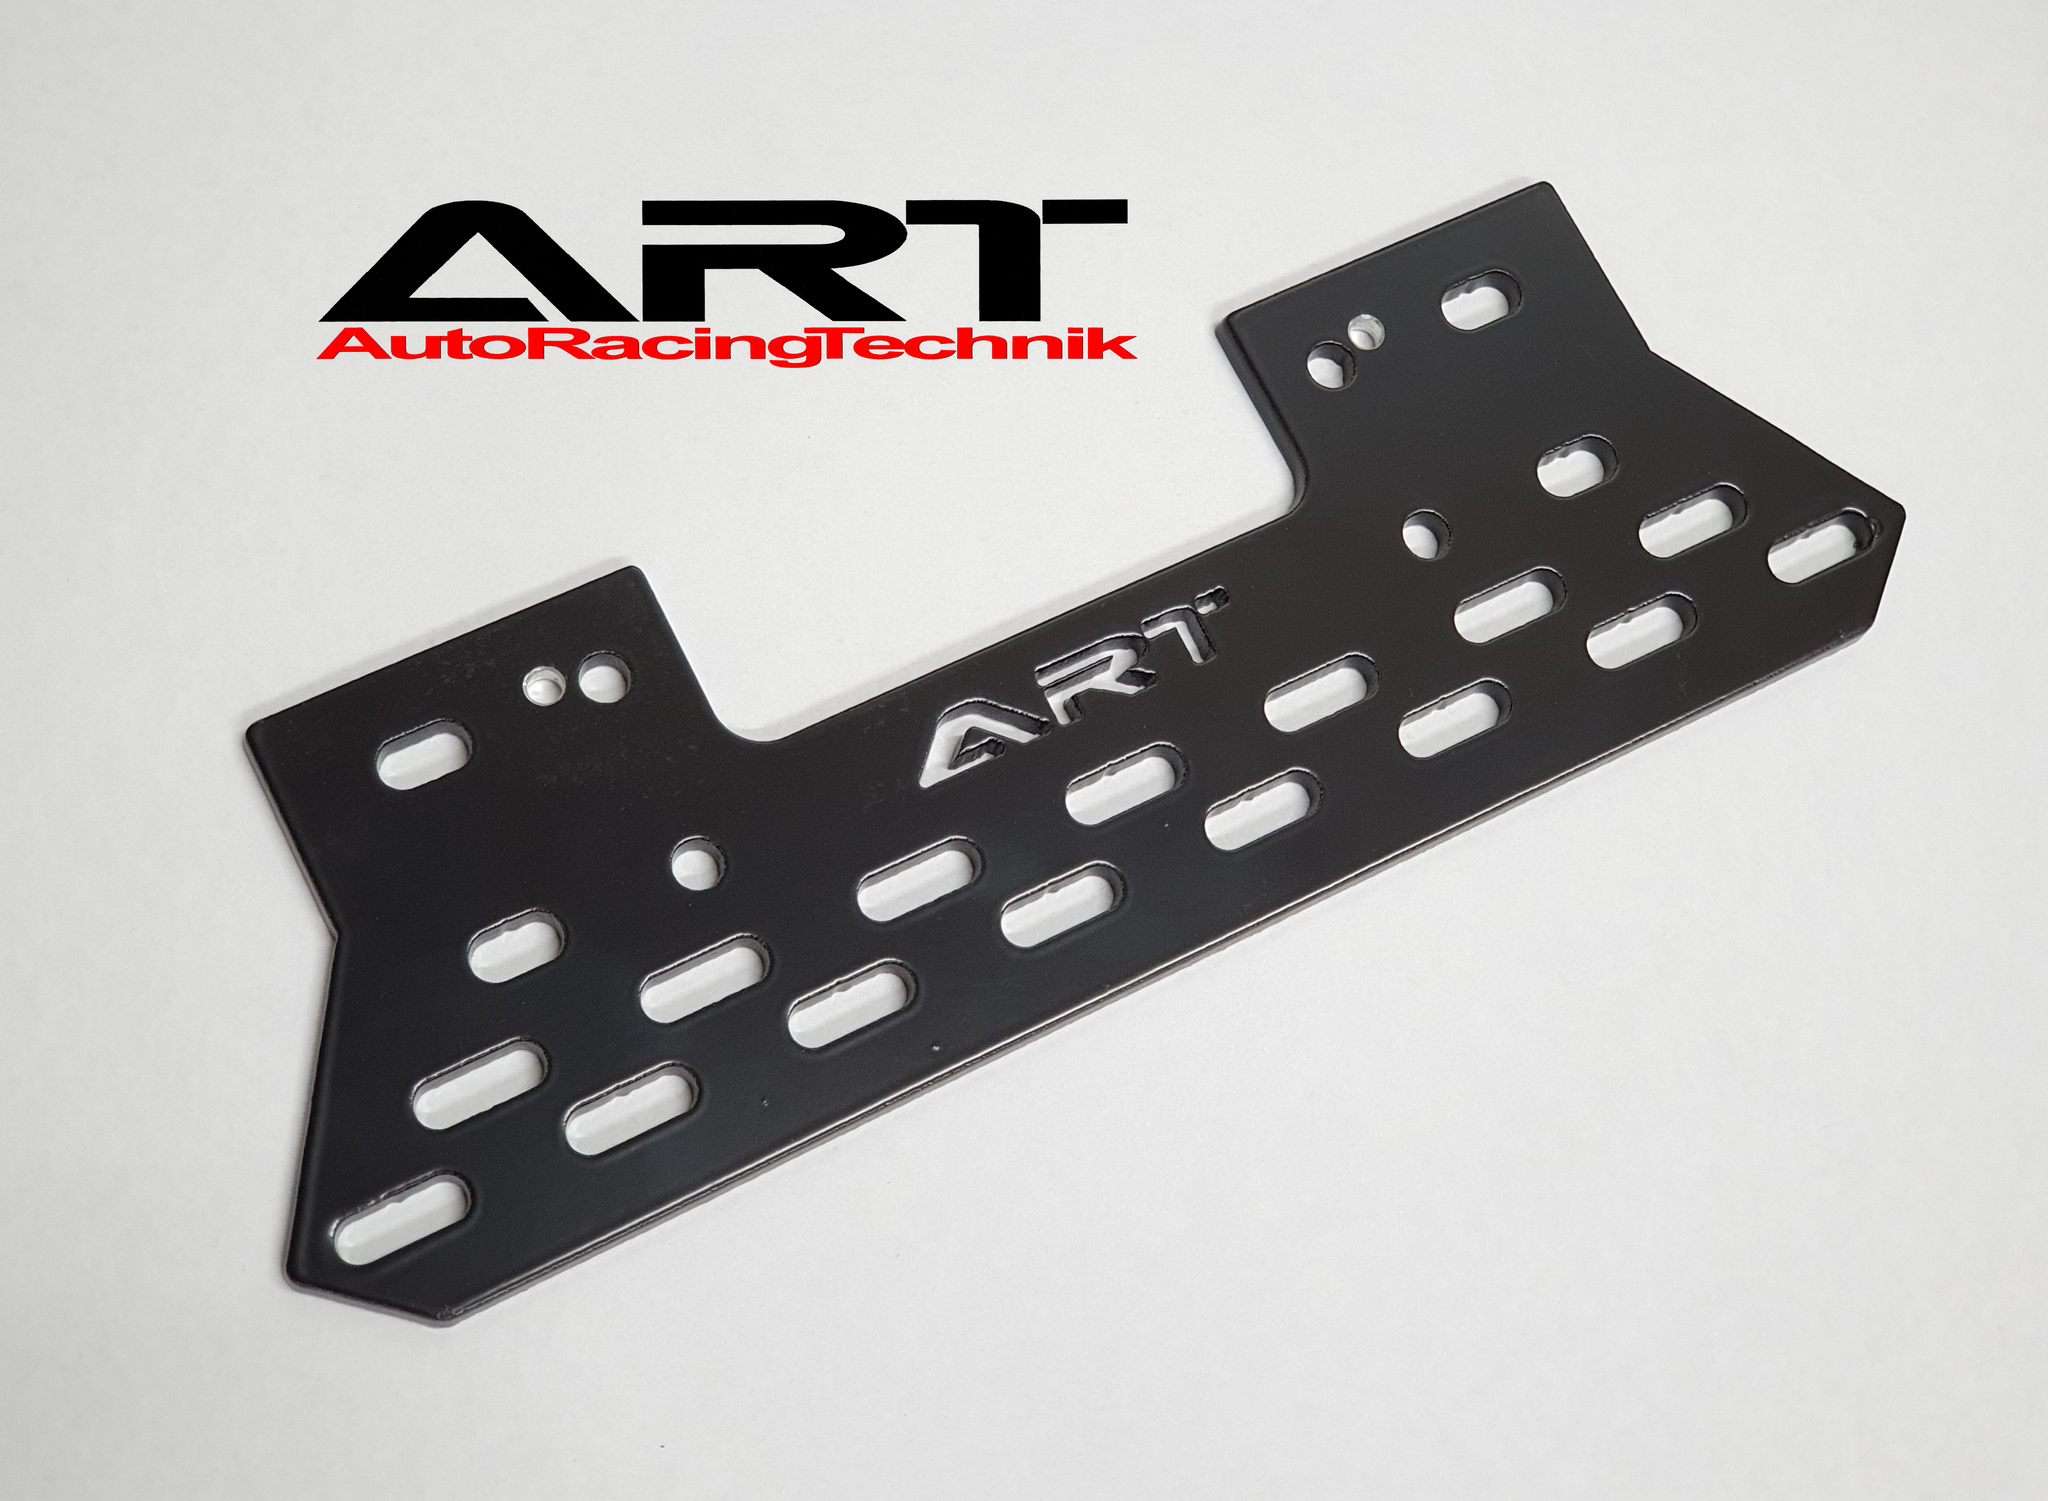 Fire Extinguisher Bracket to suit Porsche Boxster 986 / Carrera 996 with standard factory seats